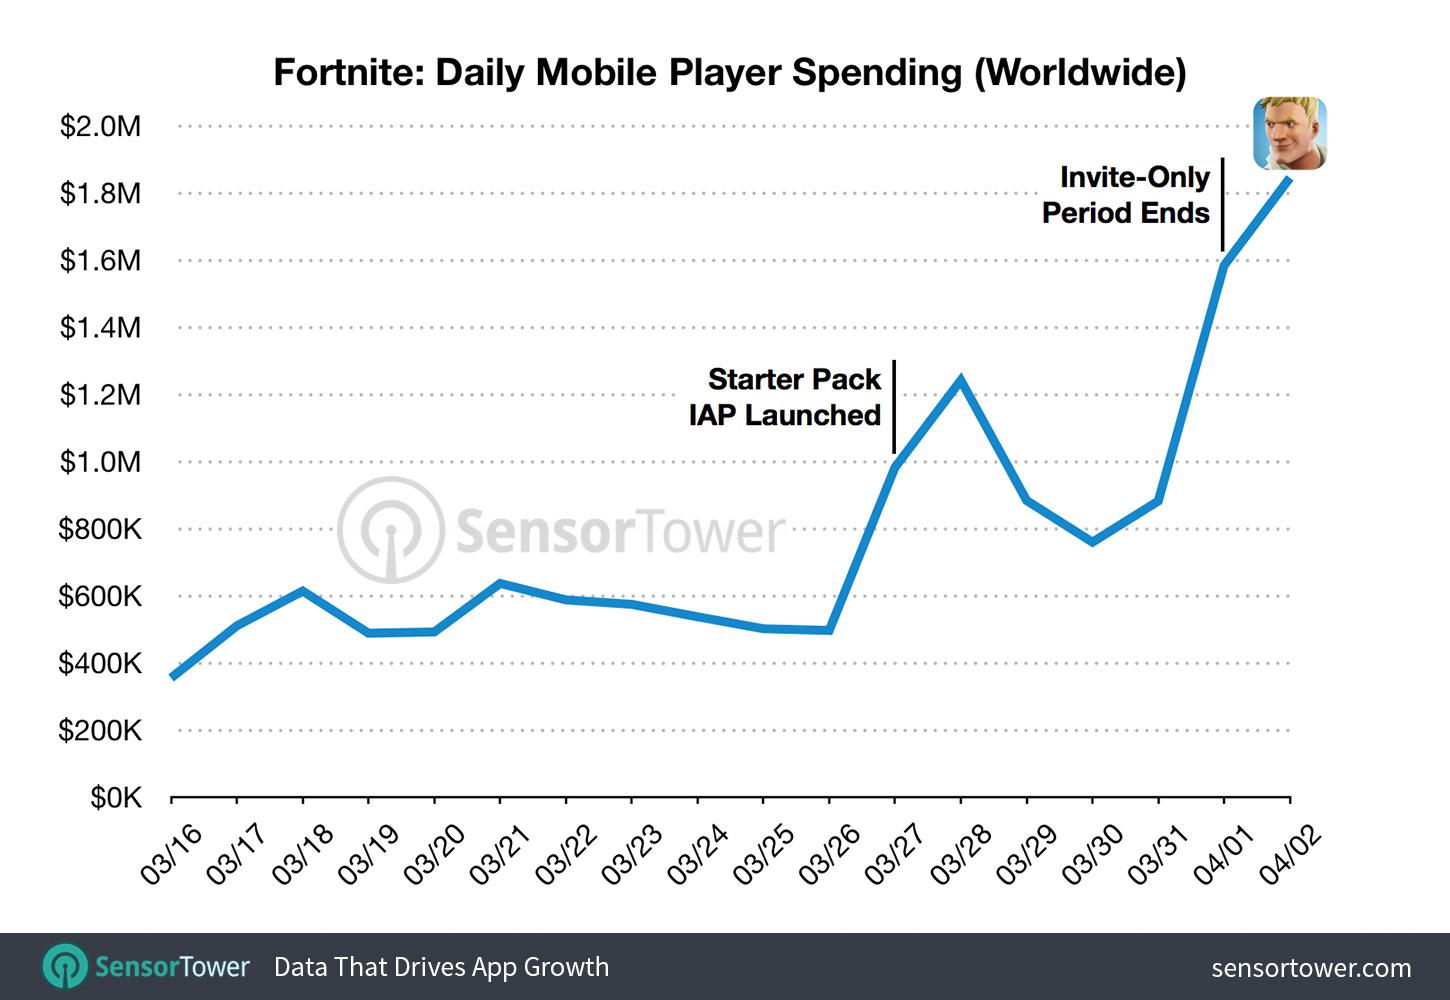 How Much Does Fortnite Make On Mobile Fortnite Mobile S Shocking Daily Revenue Will Make Your Eyes Water Slashgear